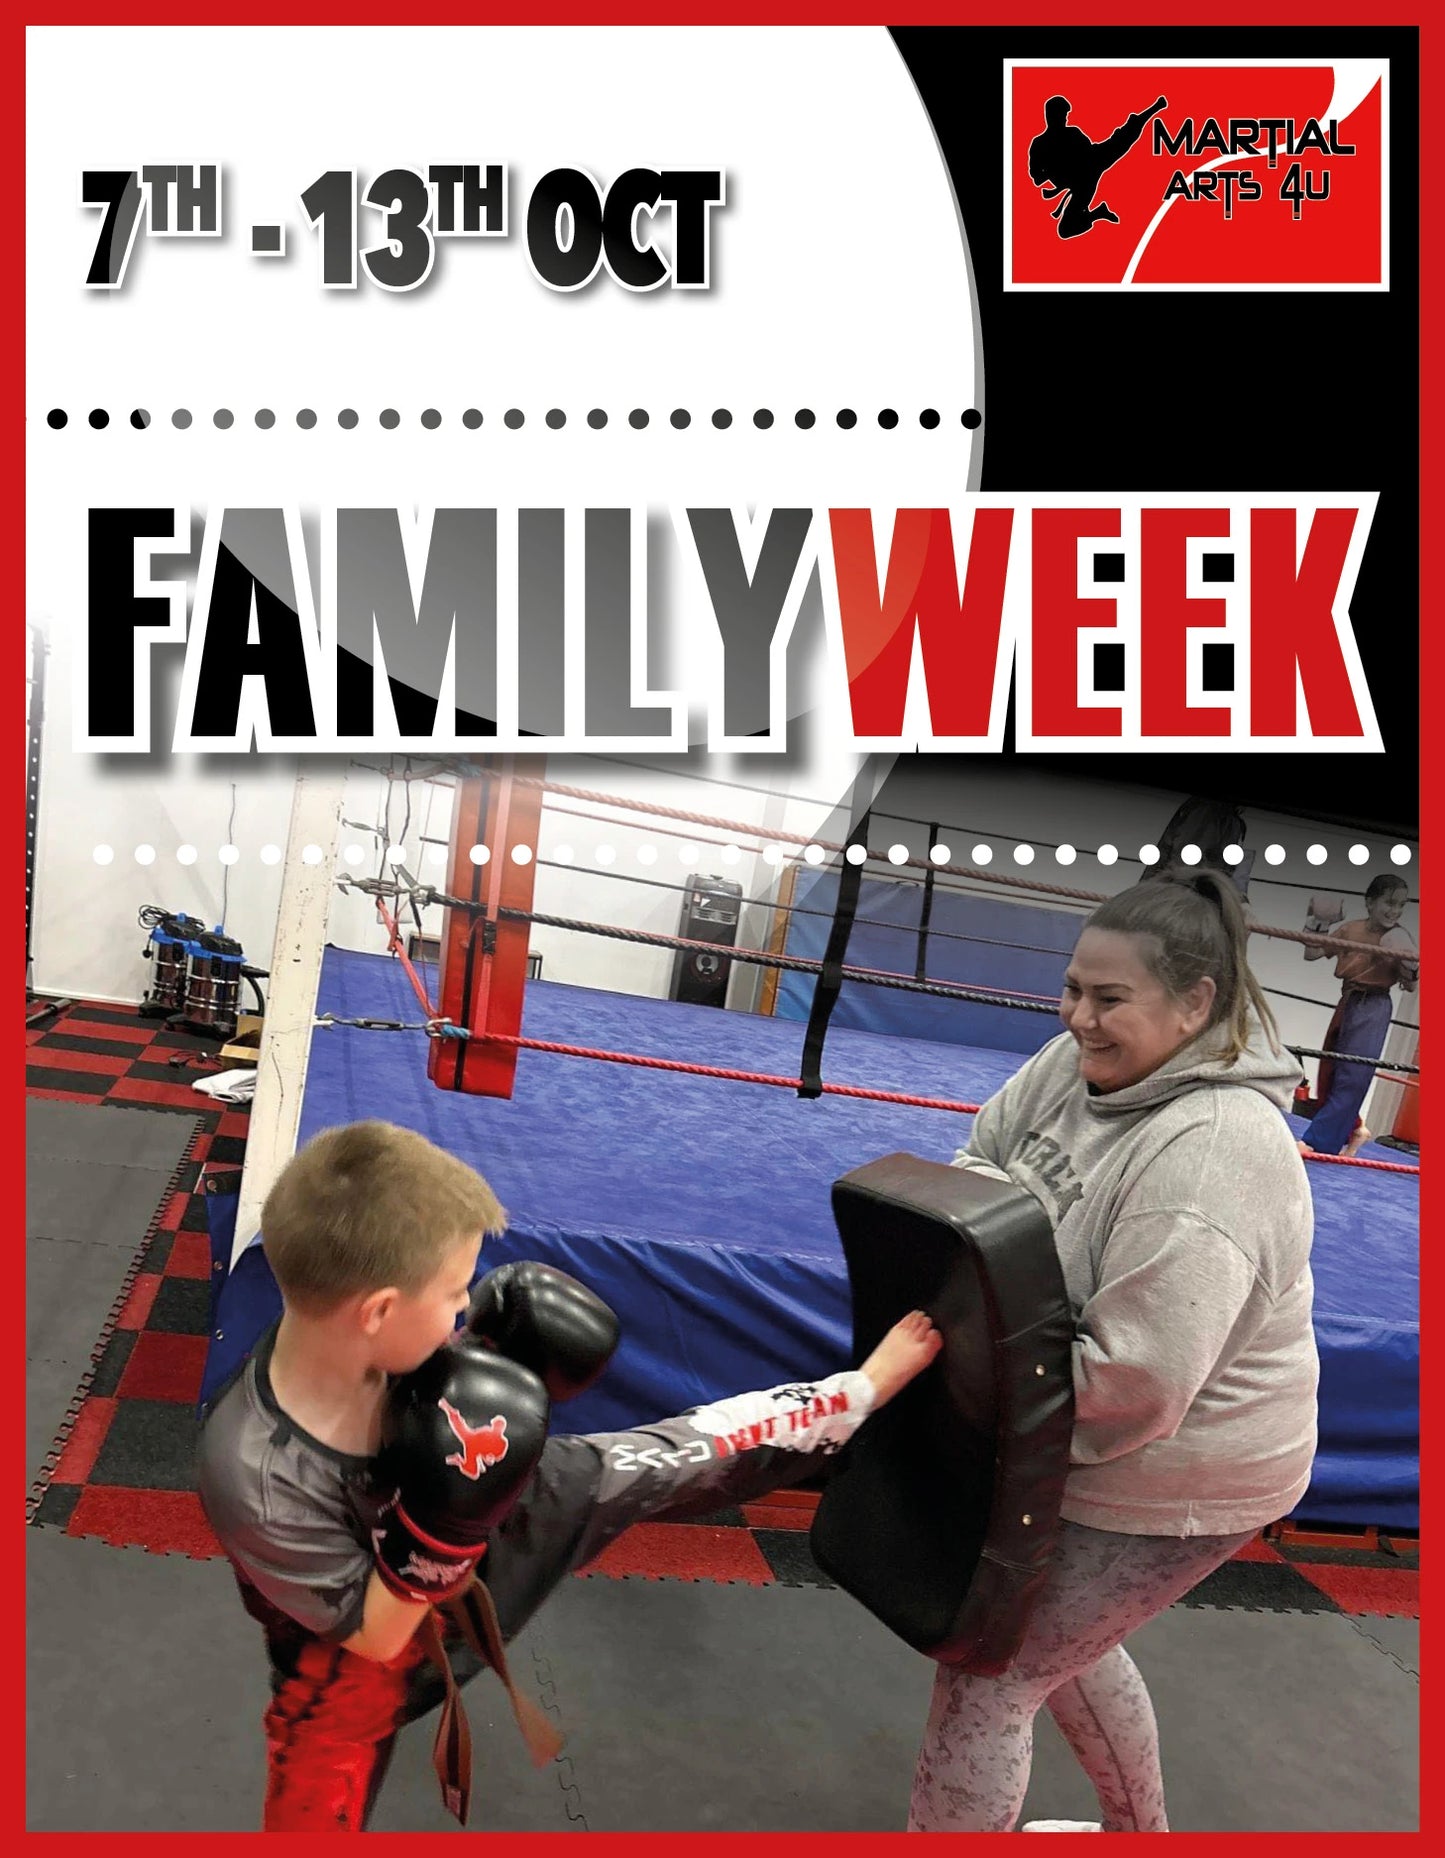 7th - 13th Oct Family Week